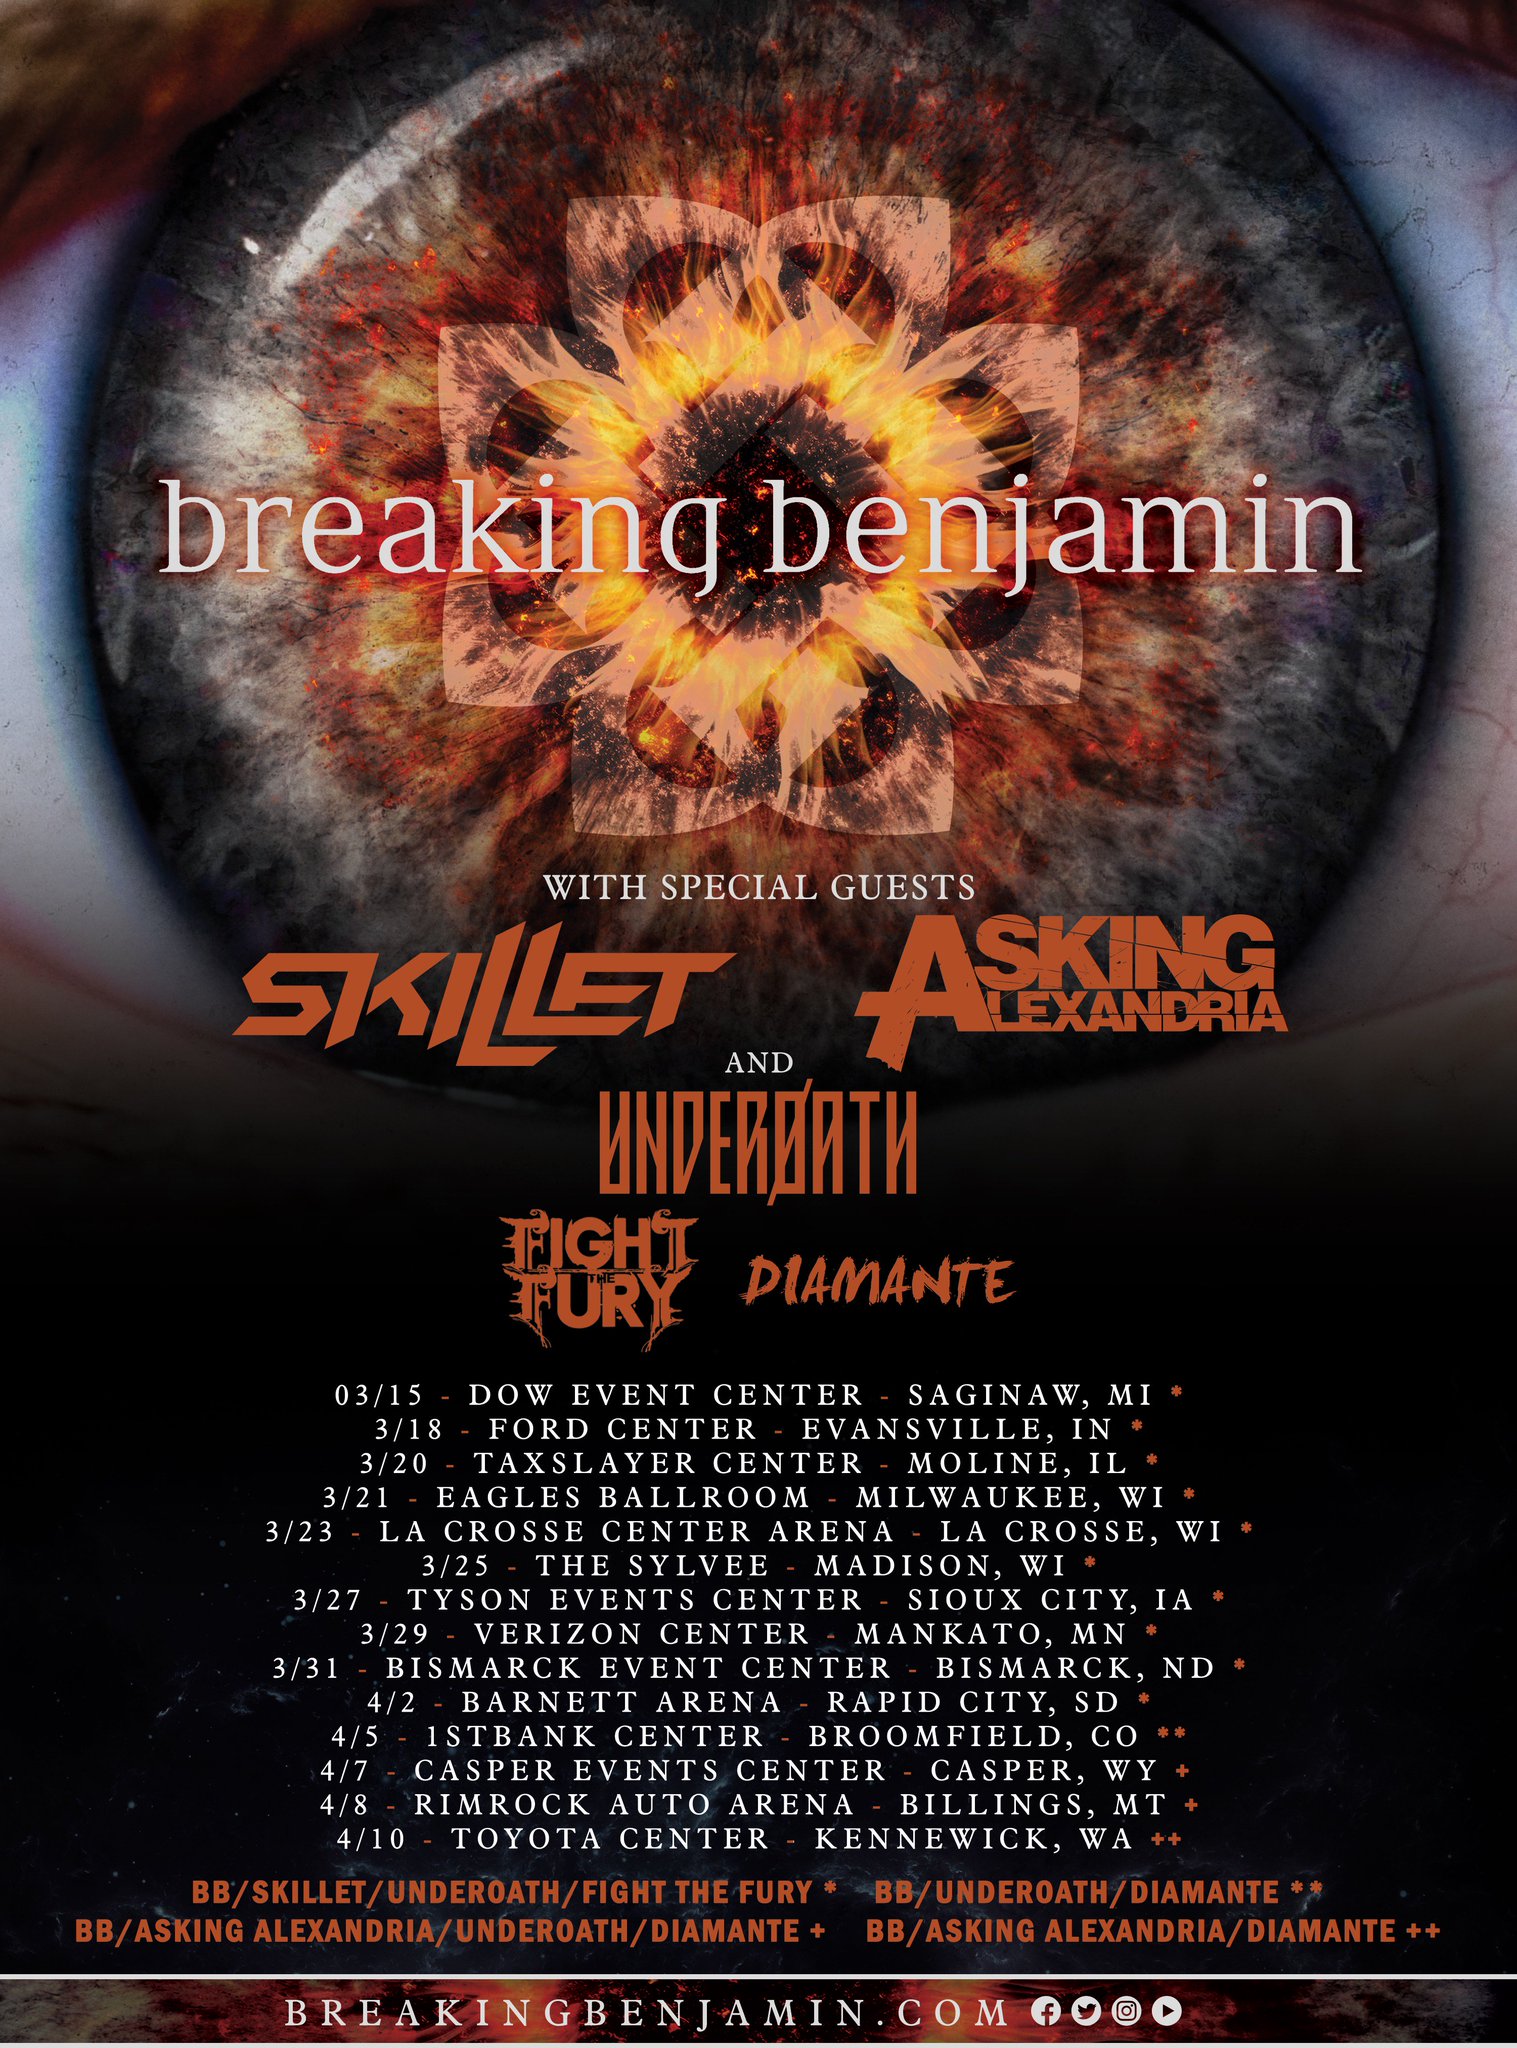 Breaking Benjamin on Twitter "We're excited to announce our